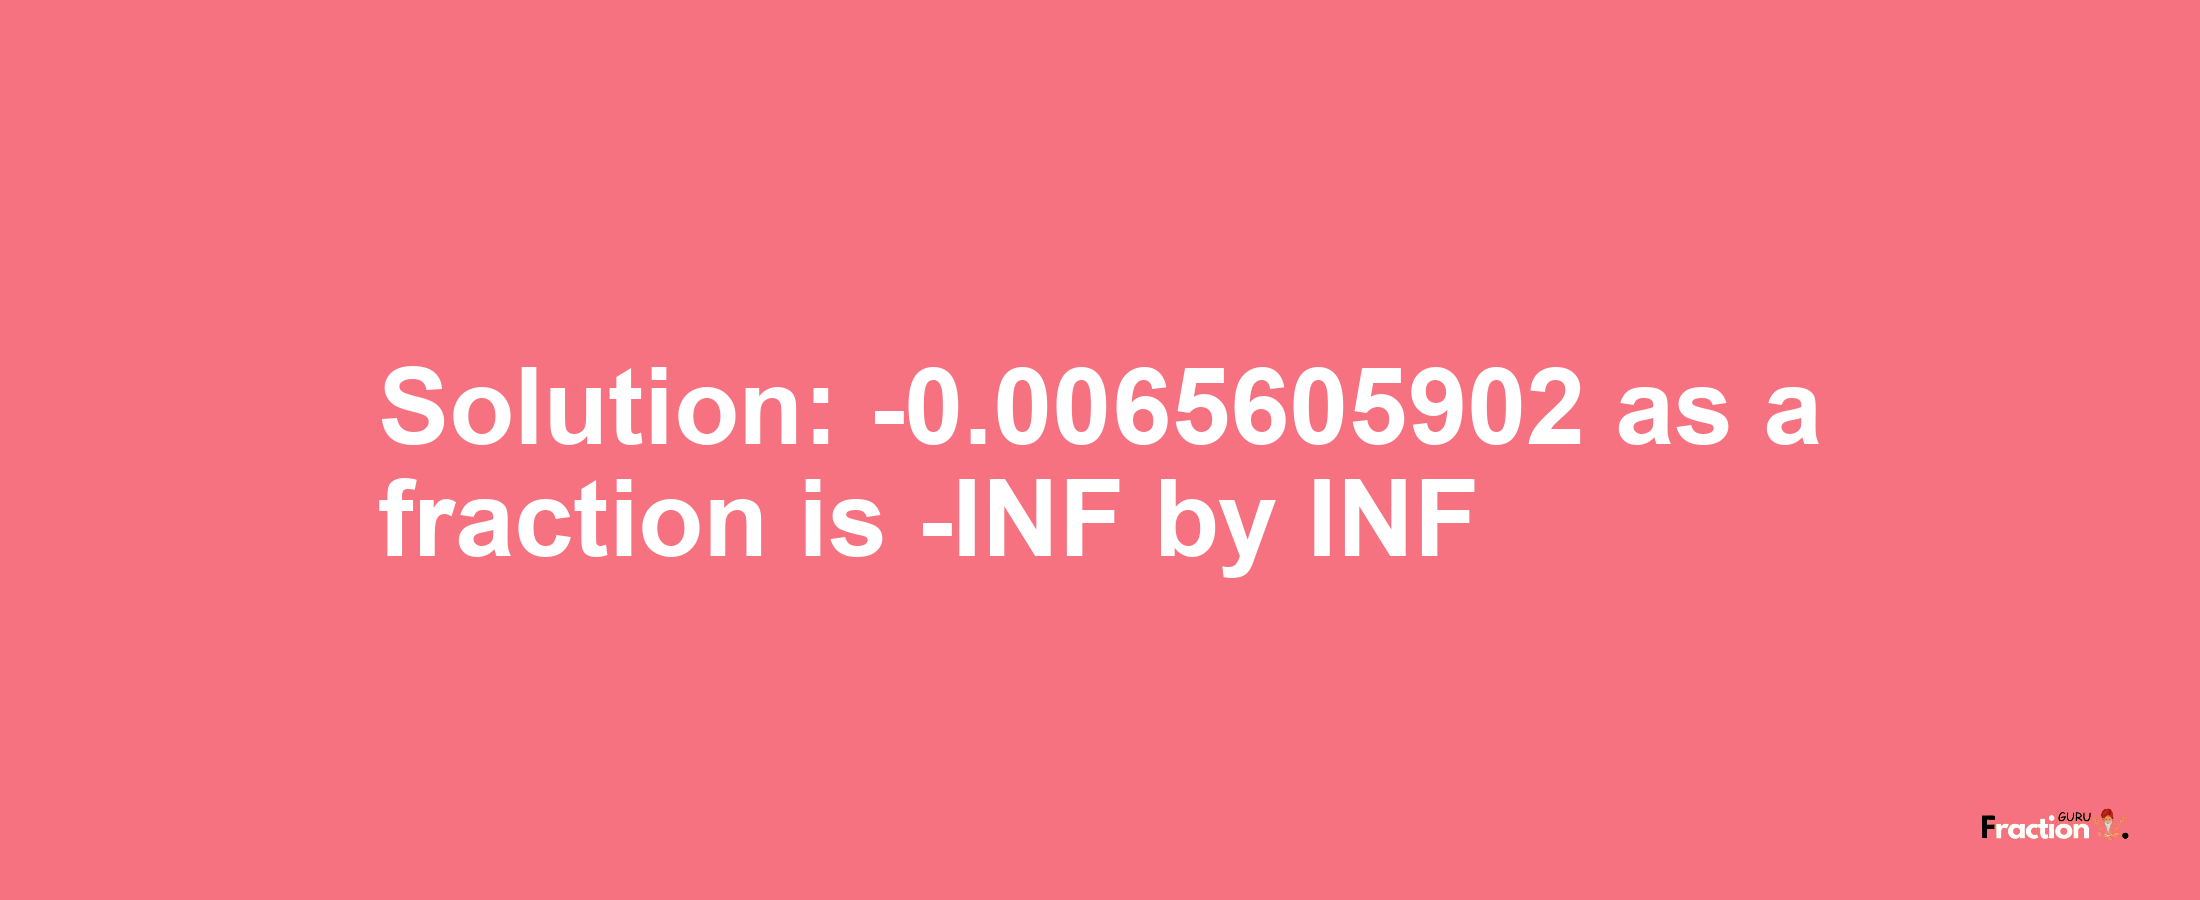 Solution:-0.0065605902 as a fraction is -INF/INF